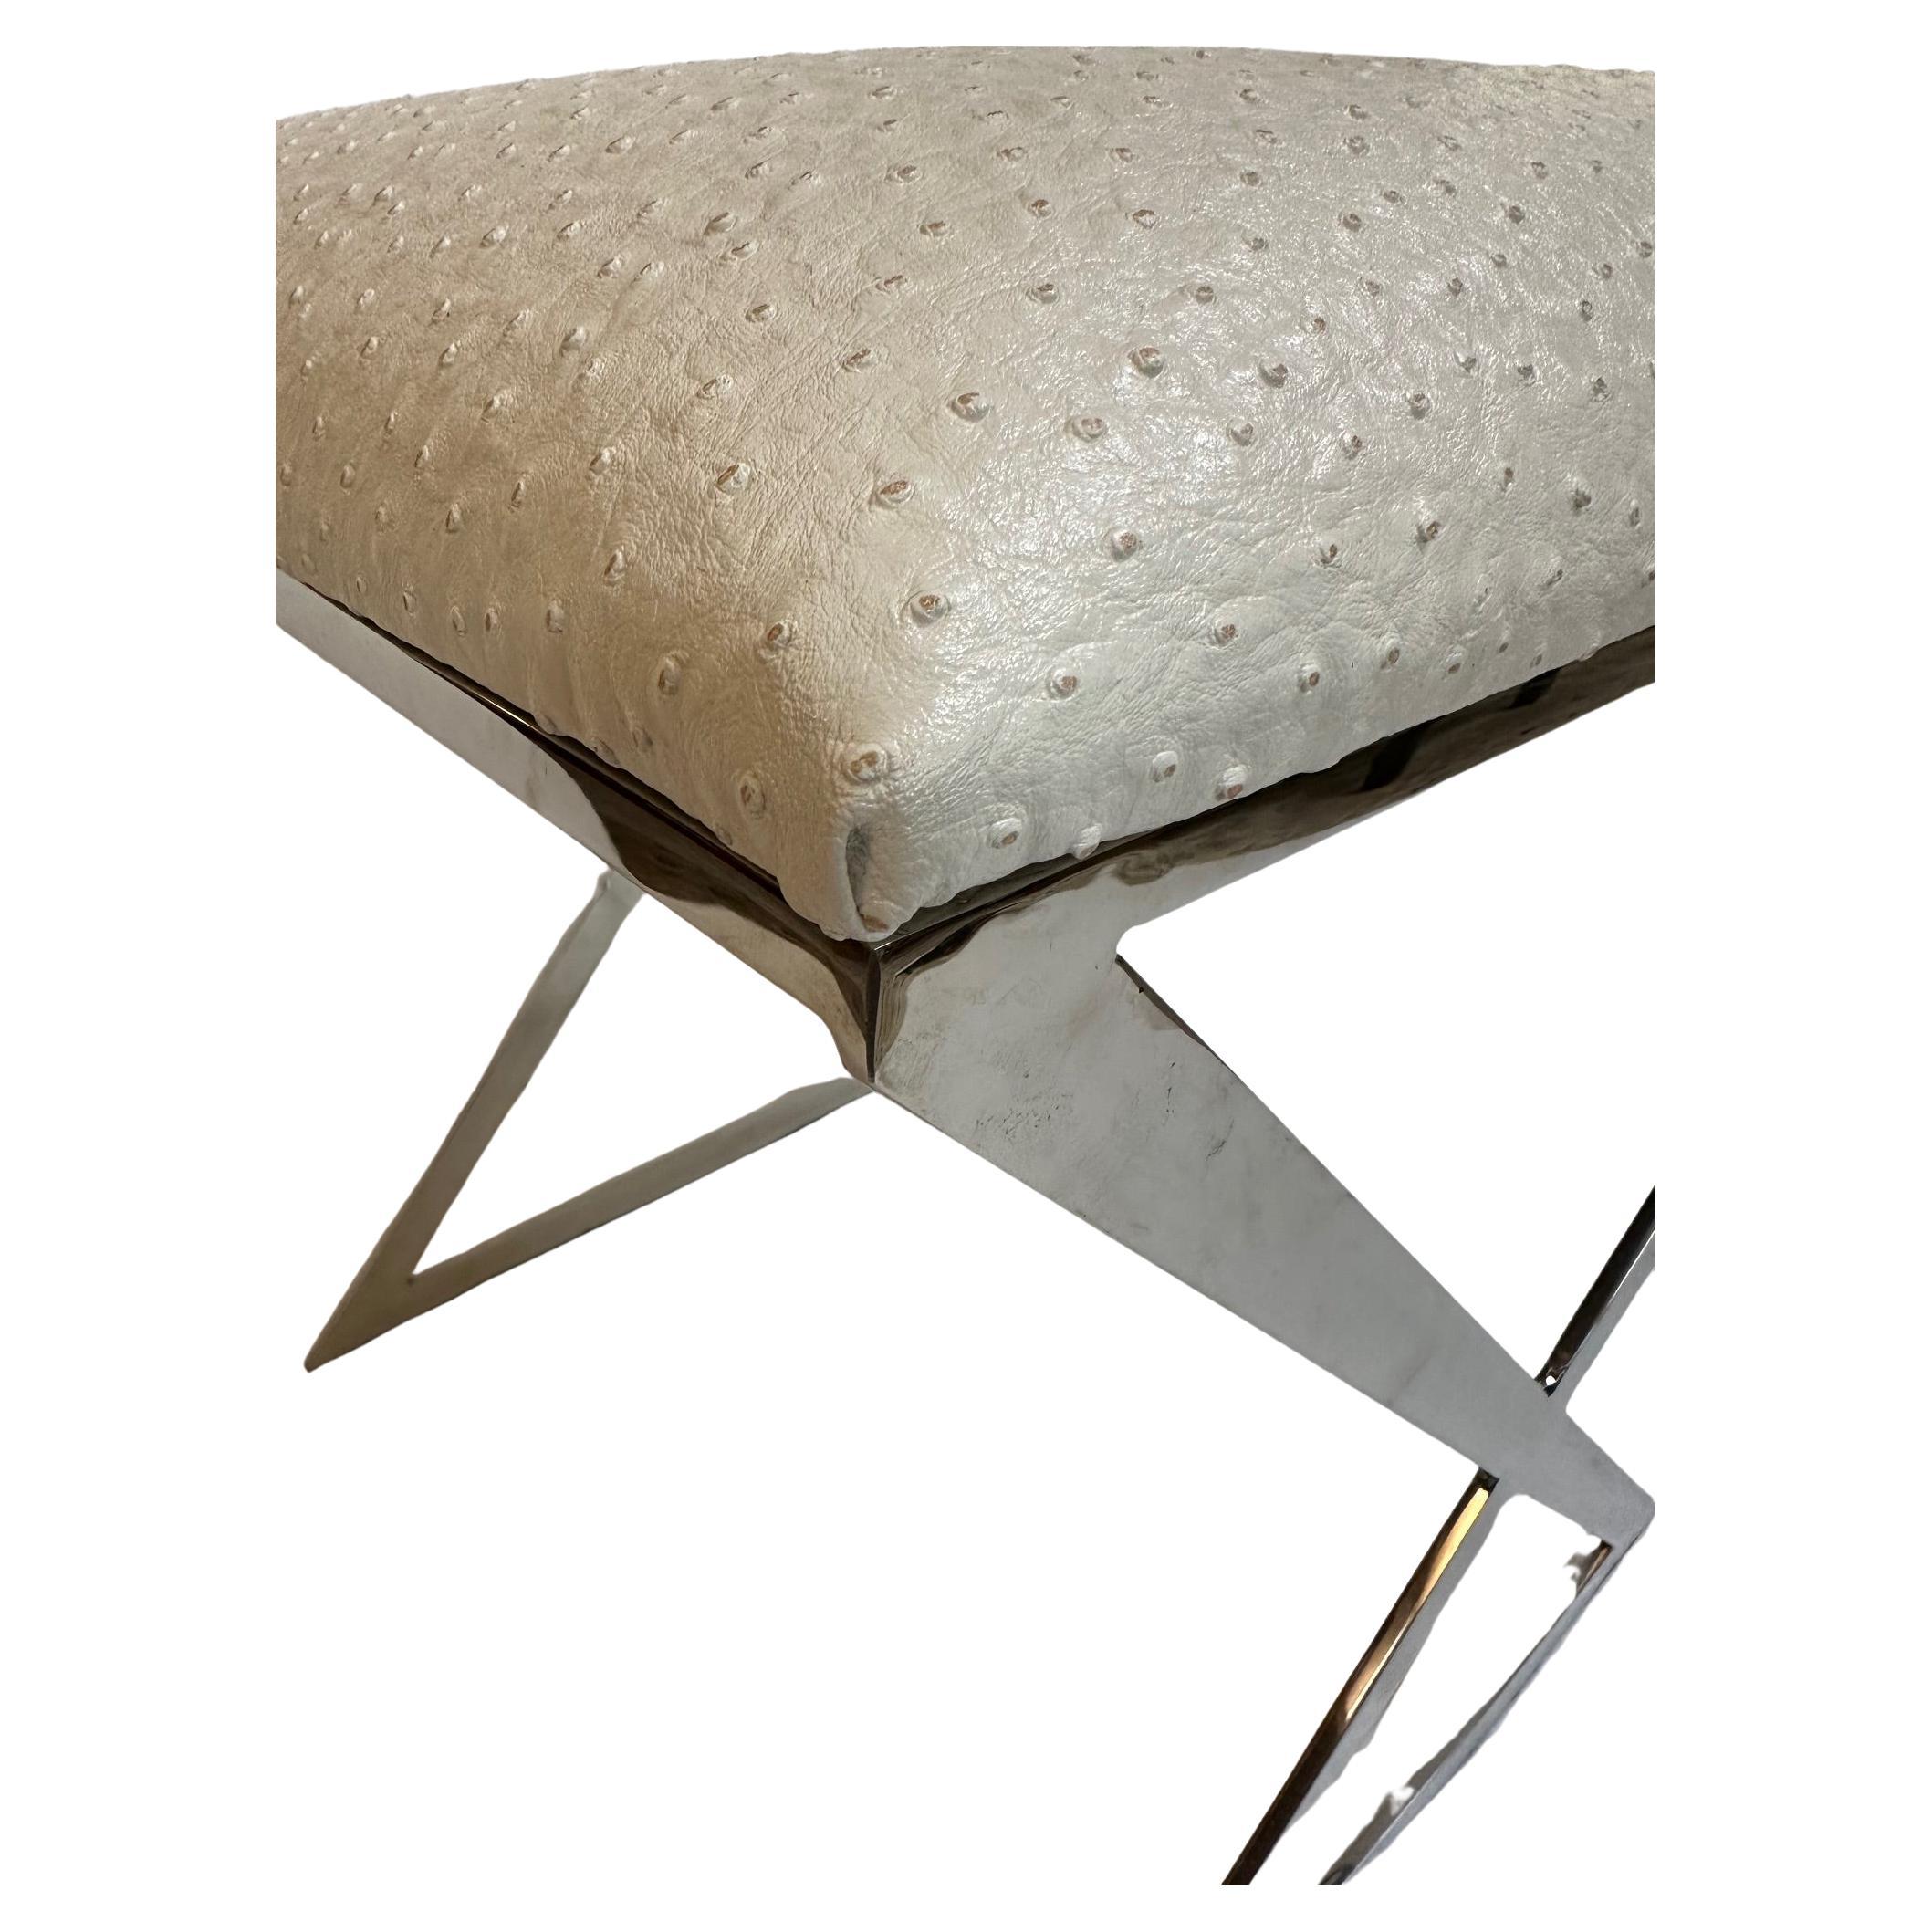 Glam vanity bench or stool having elegant polished nickel base and creamy faux ostrich upholstered seat.  Like new.